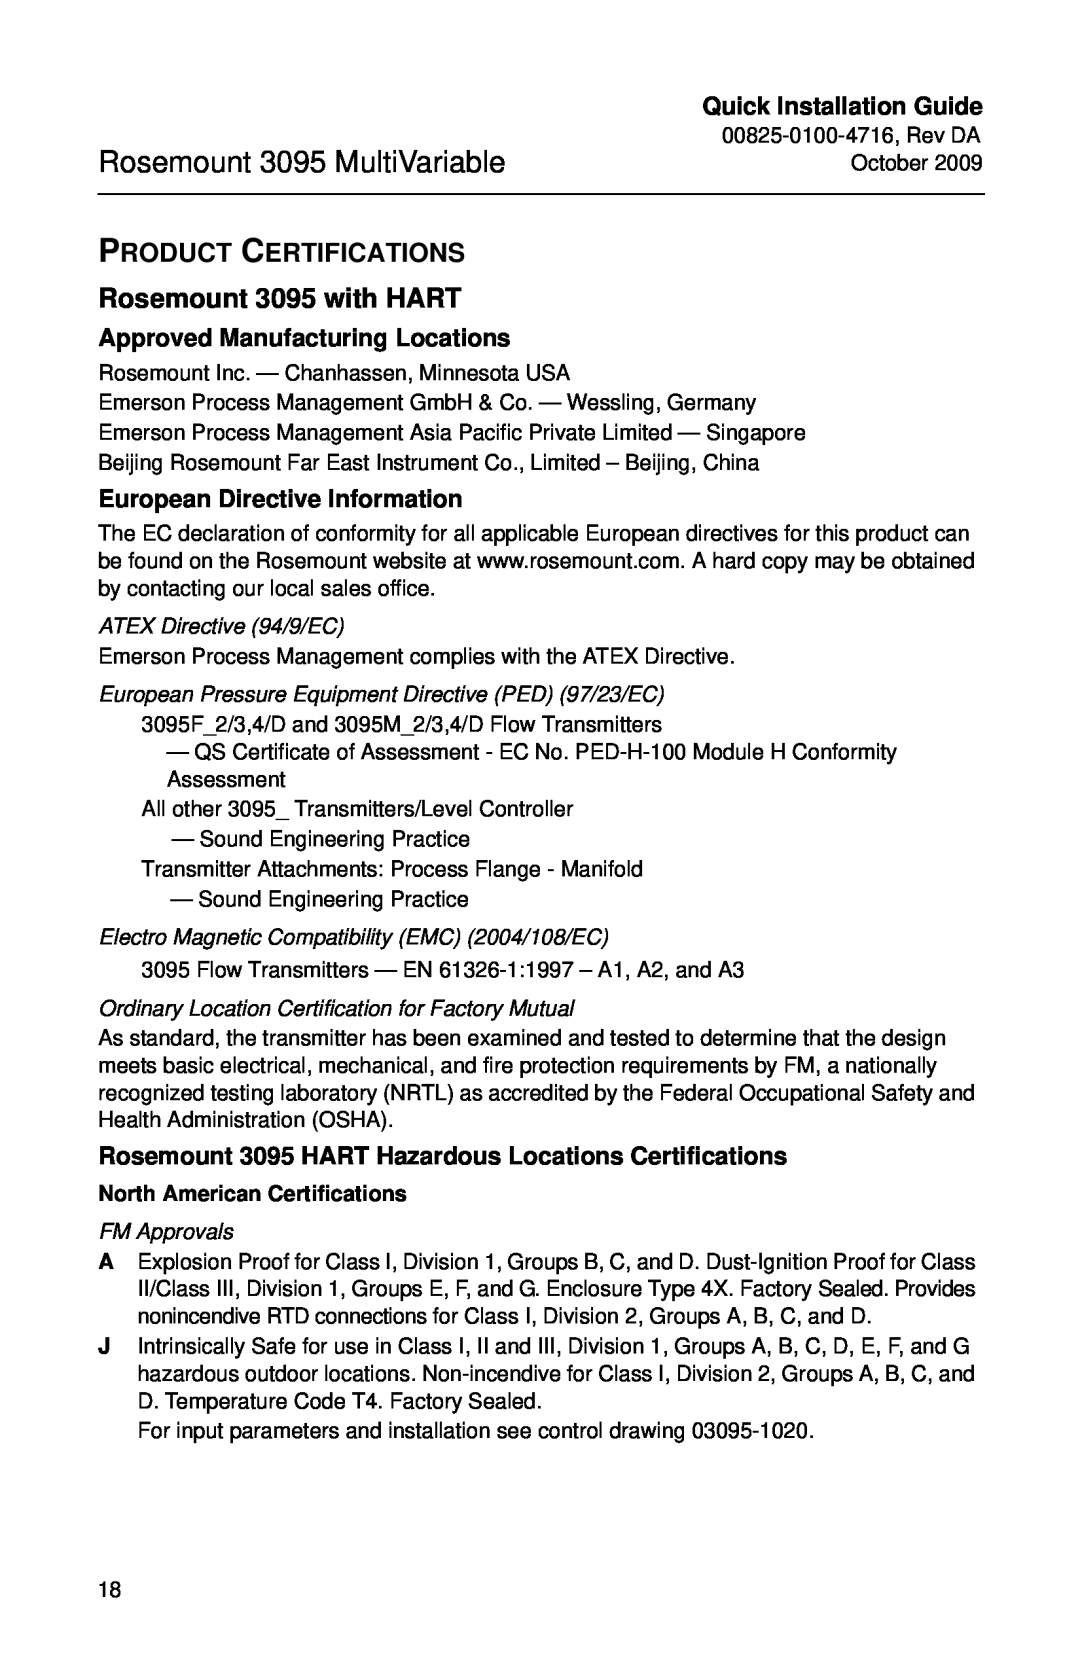 Emerson manual PRODUCT CERTIFICATIONS Rosemount 3095 with HART, Approved Manufacturing Locations, ATEX Directive 94/9/EC 